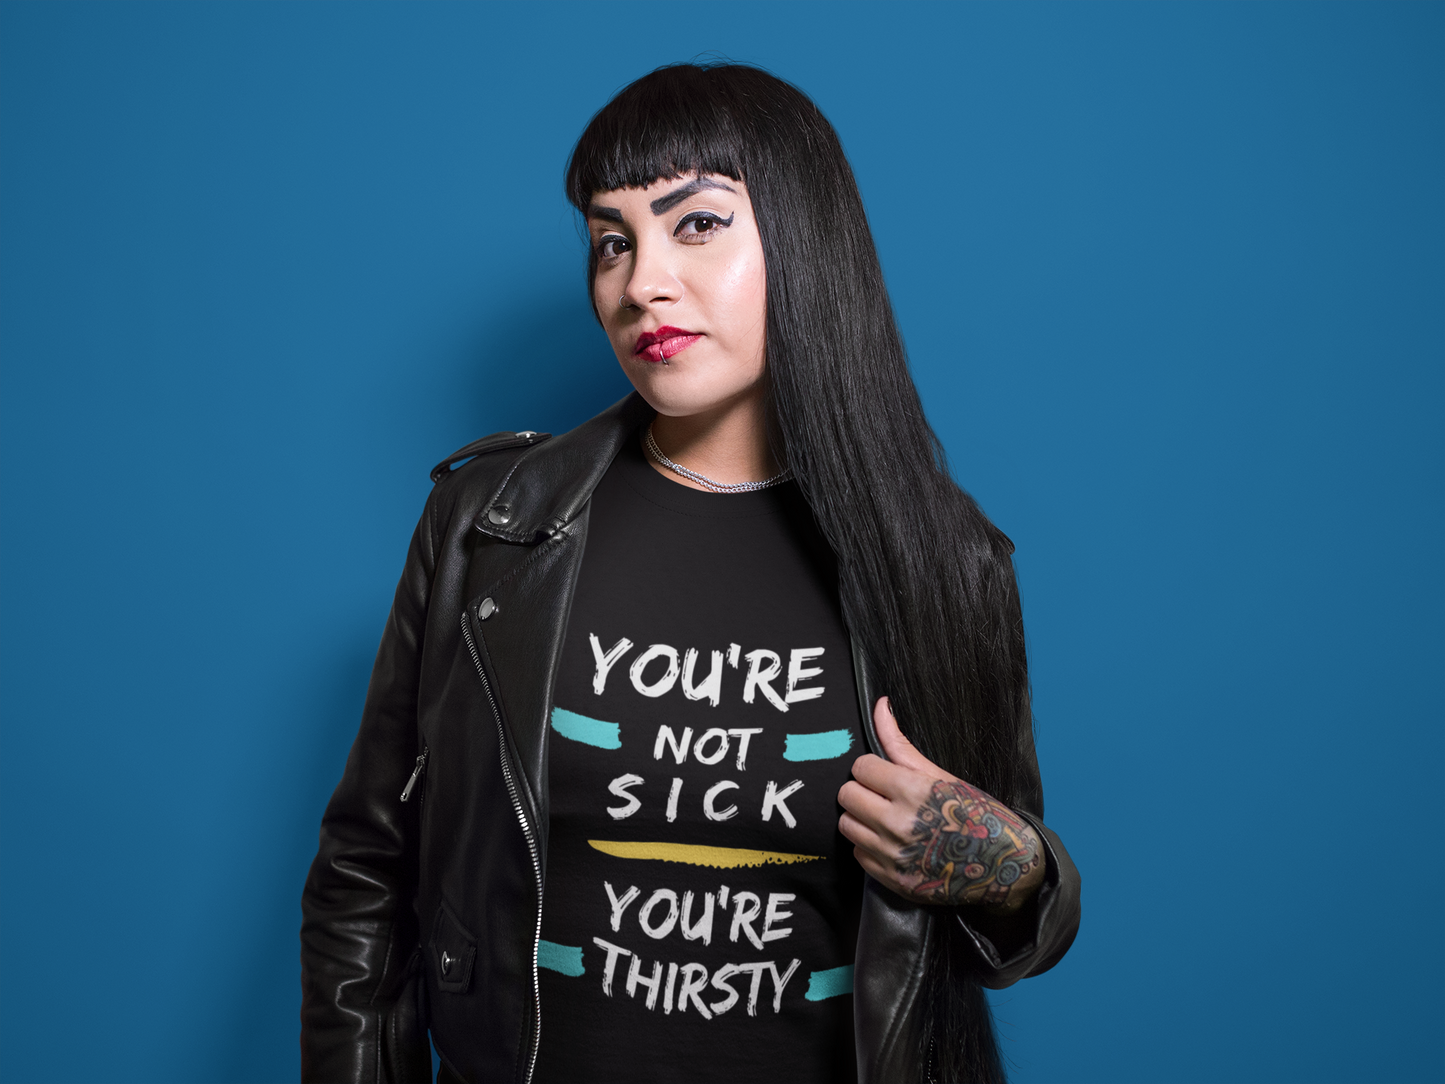 Short-Sleeve Unisex "You're Not Sick, You're Thirsty" T-Shirt